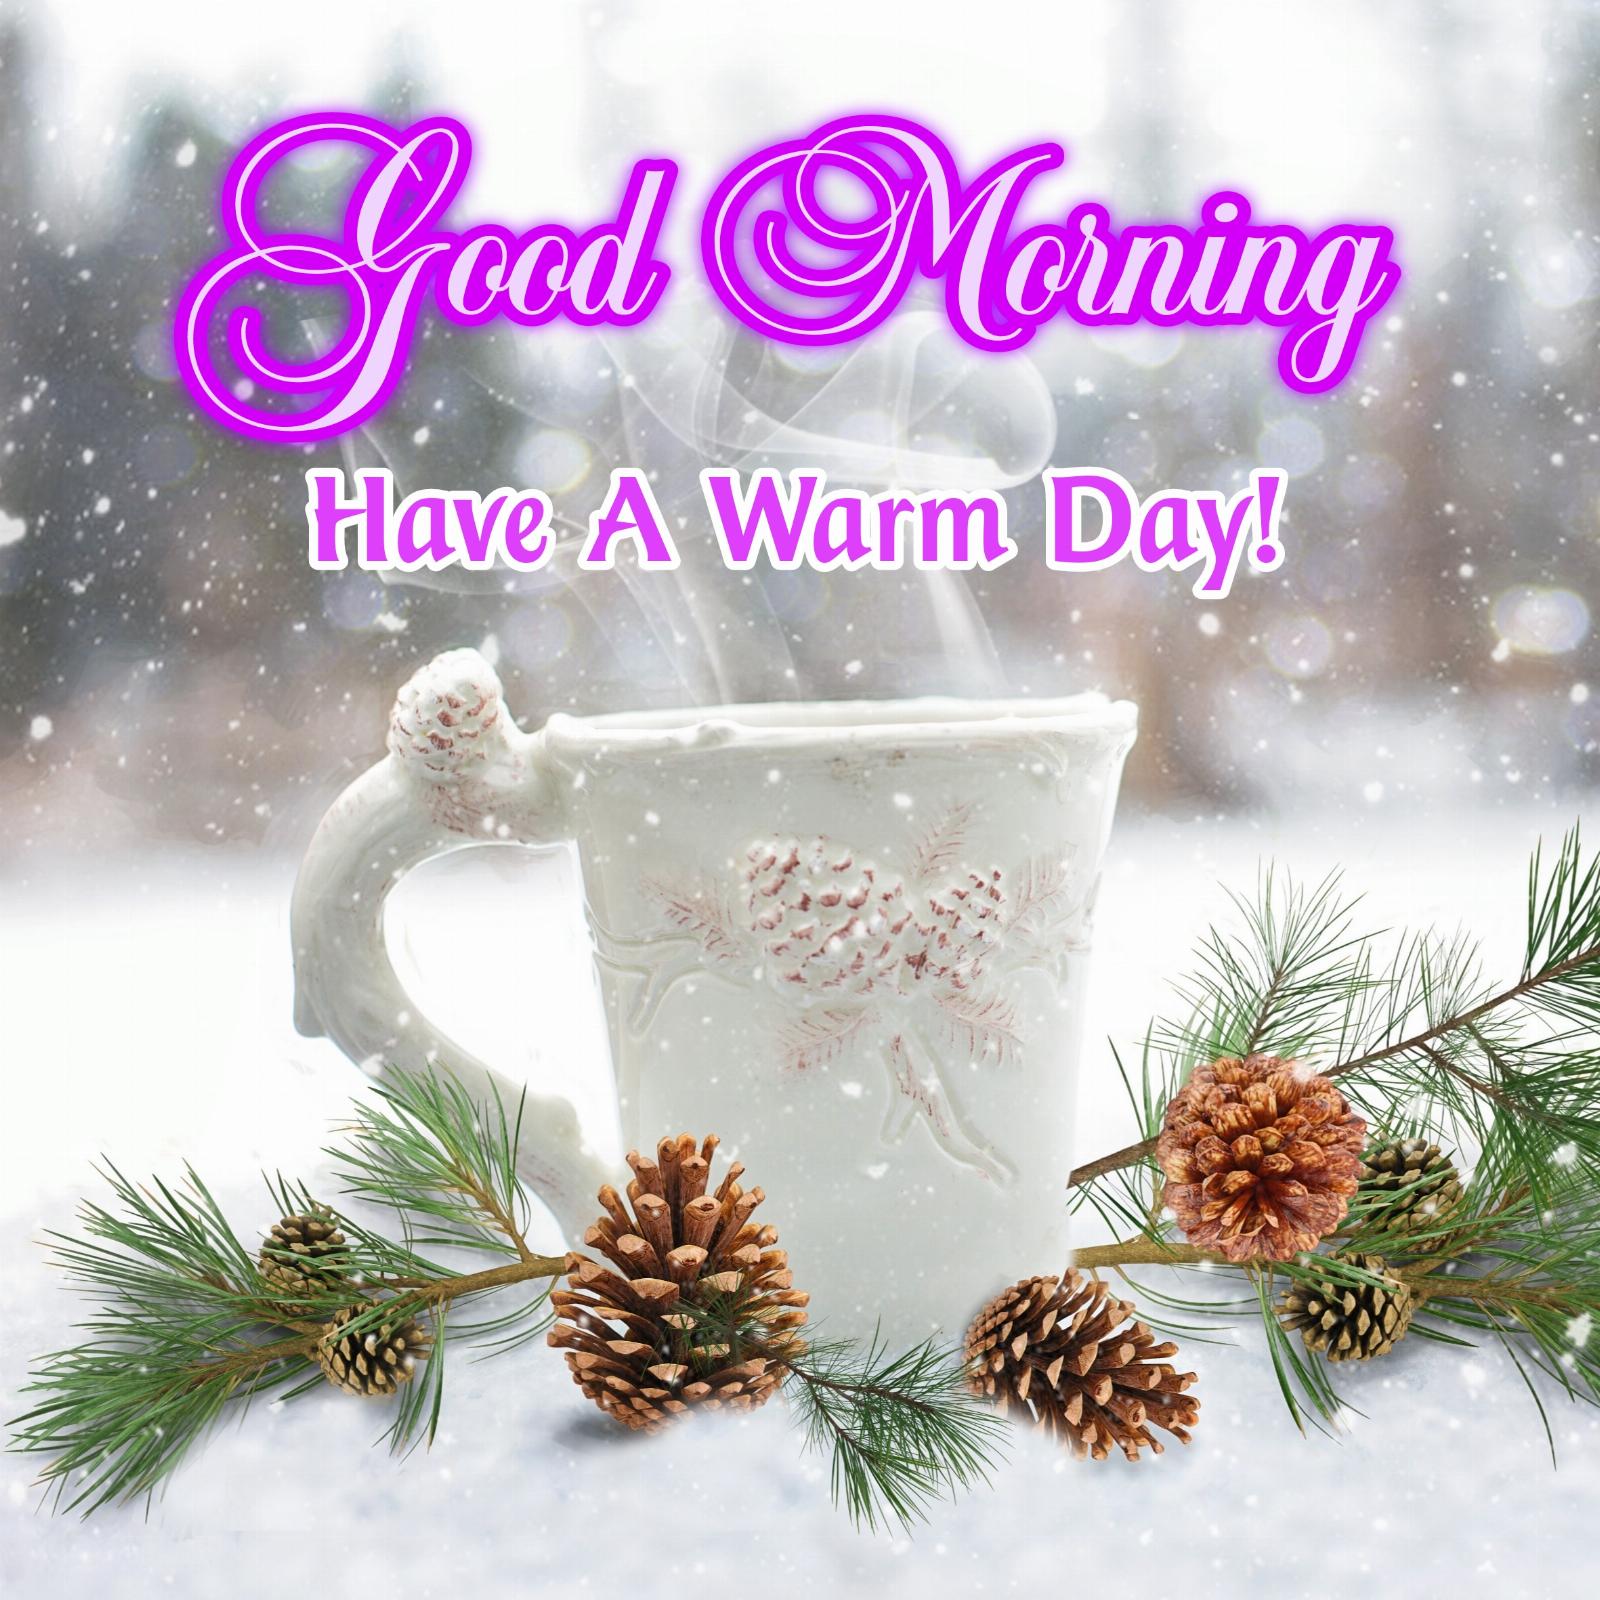 Good Morning Have a Warm Day Winter Images